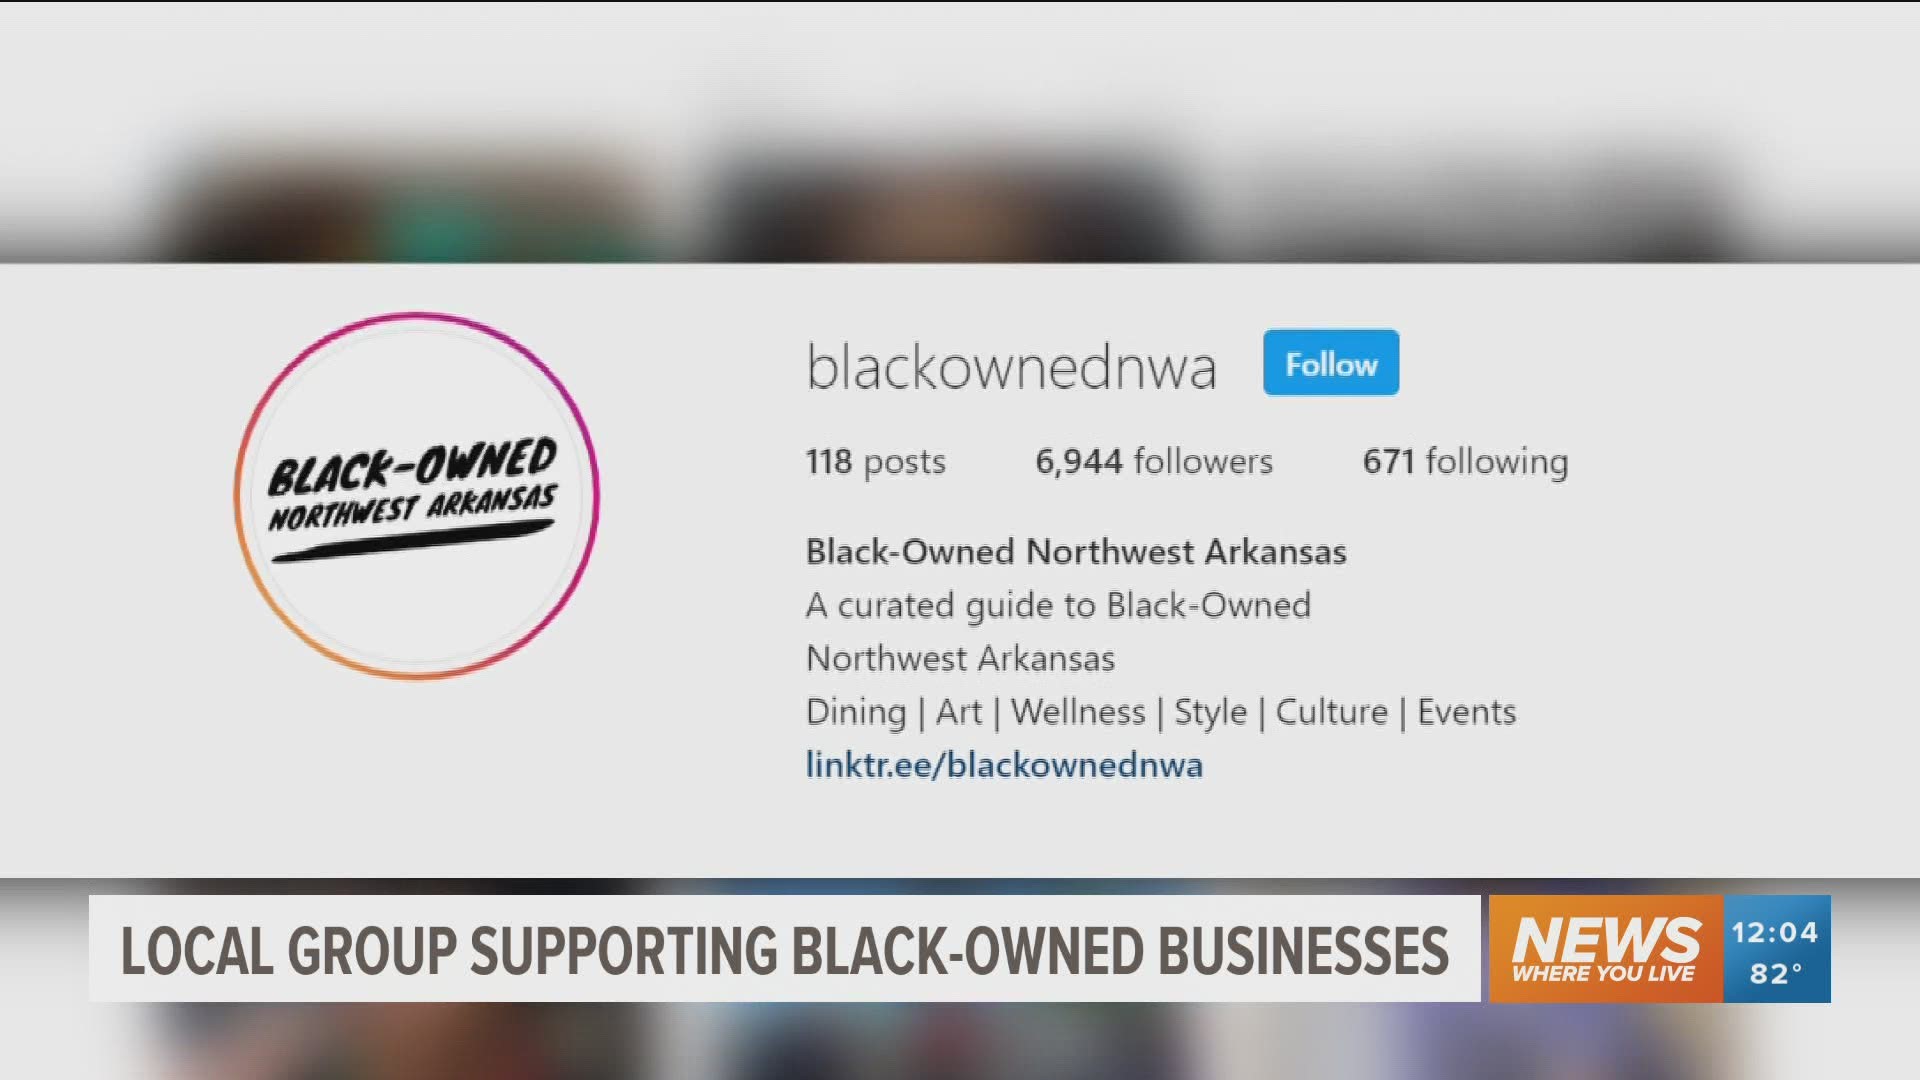 Black-Owned Northwest Arkansas is a social media page highlighting African American owned business in Northwest Arkansas.